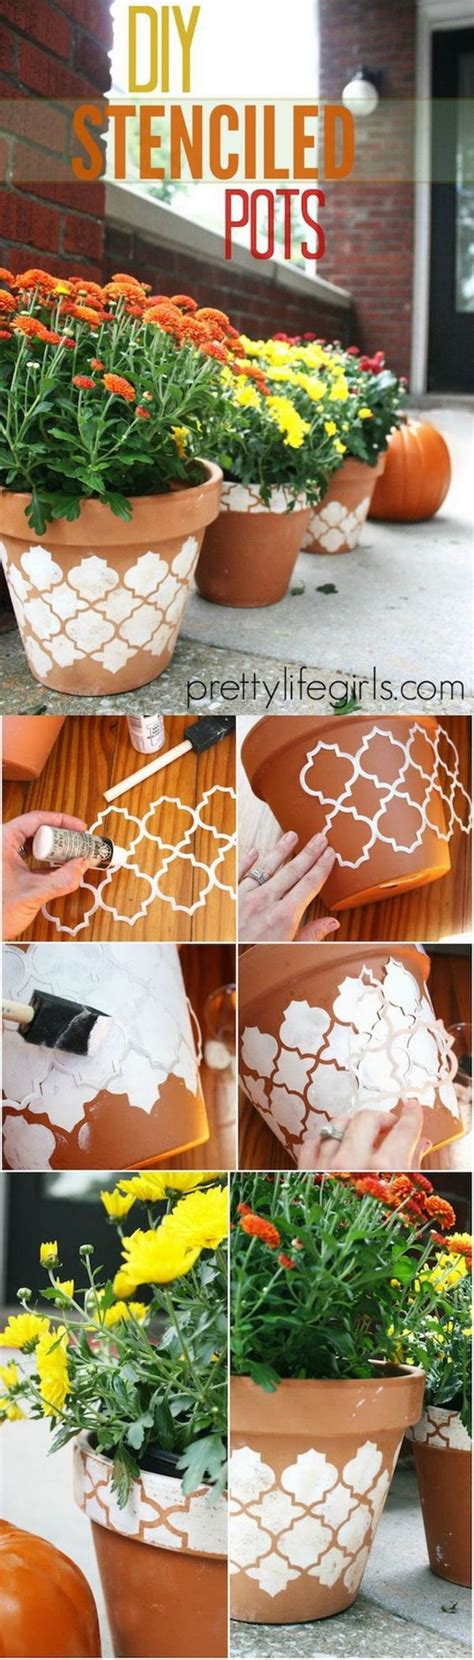 17 Creative Ideas To Decorate With Terra Cotta Flower Pots For